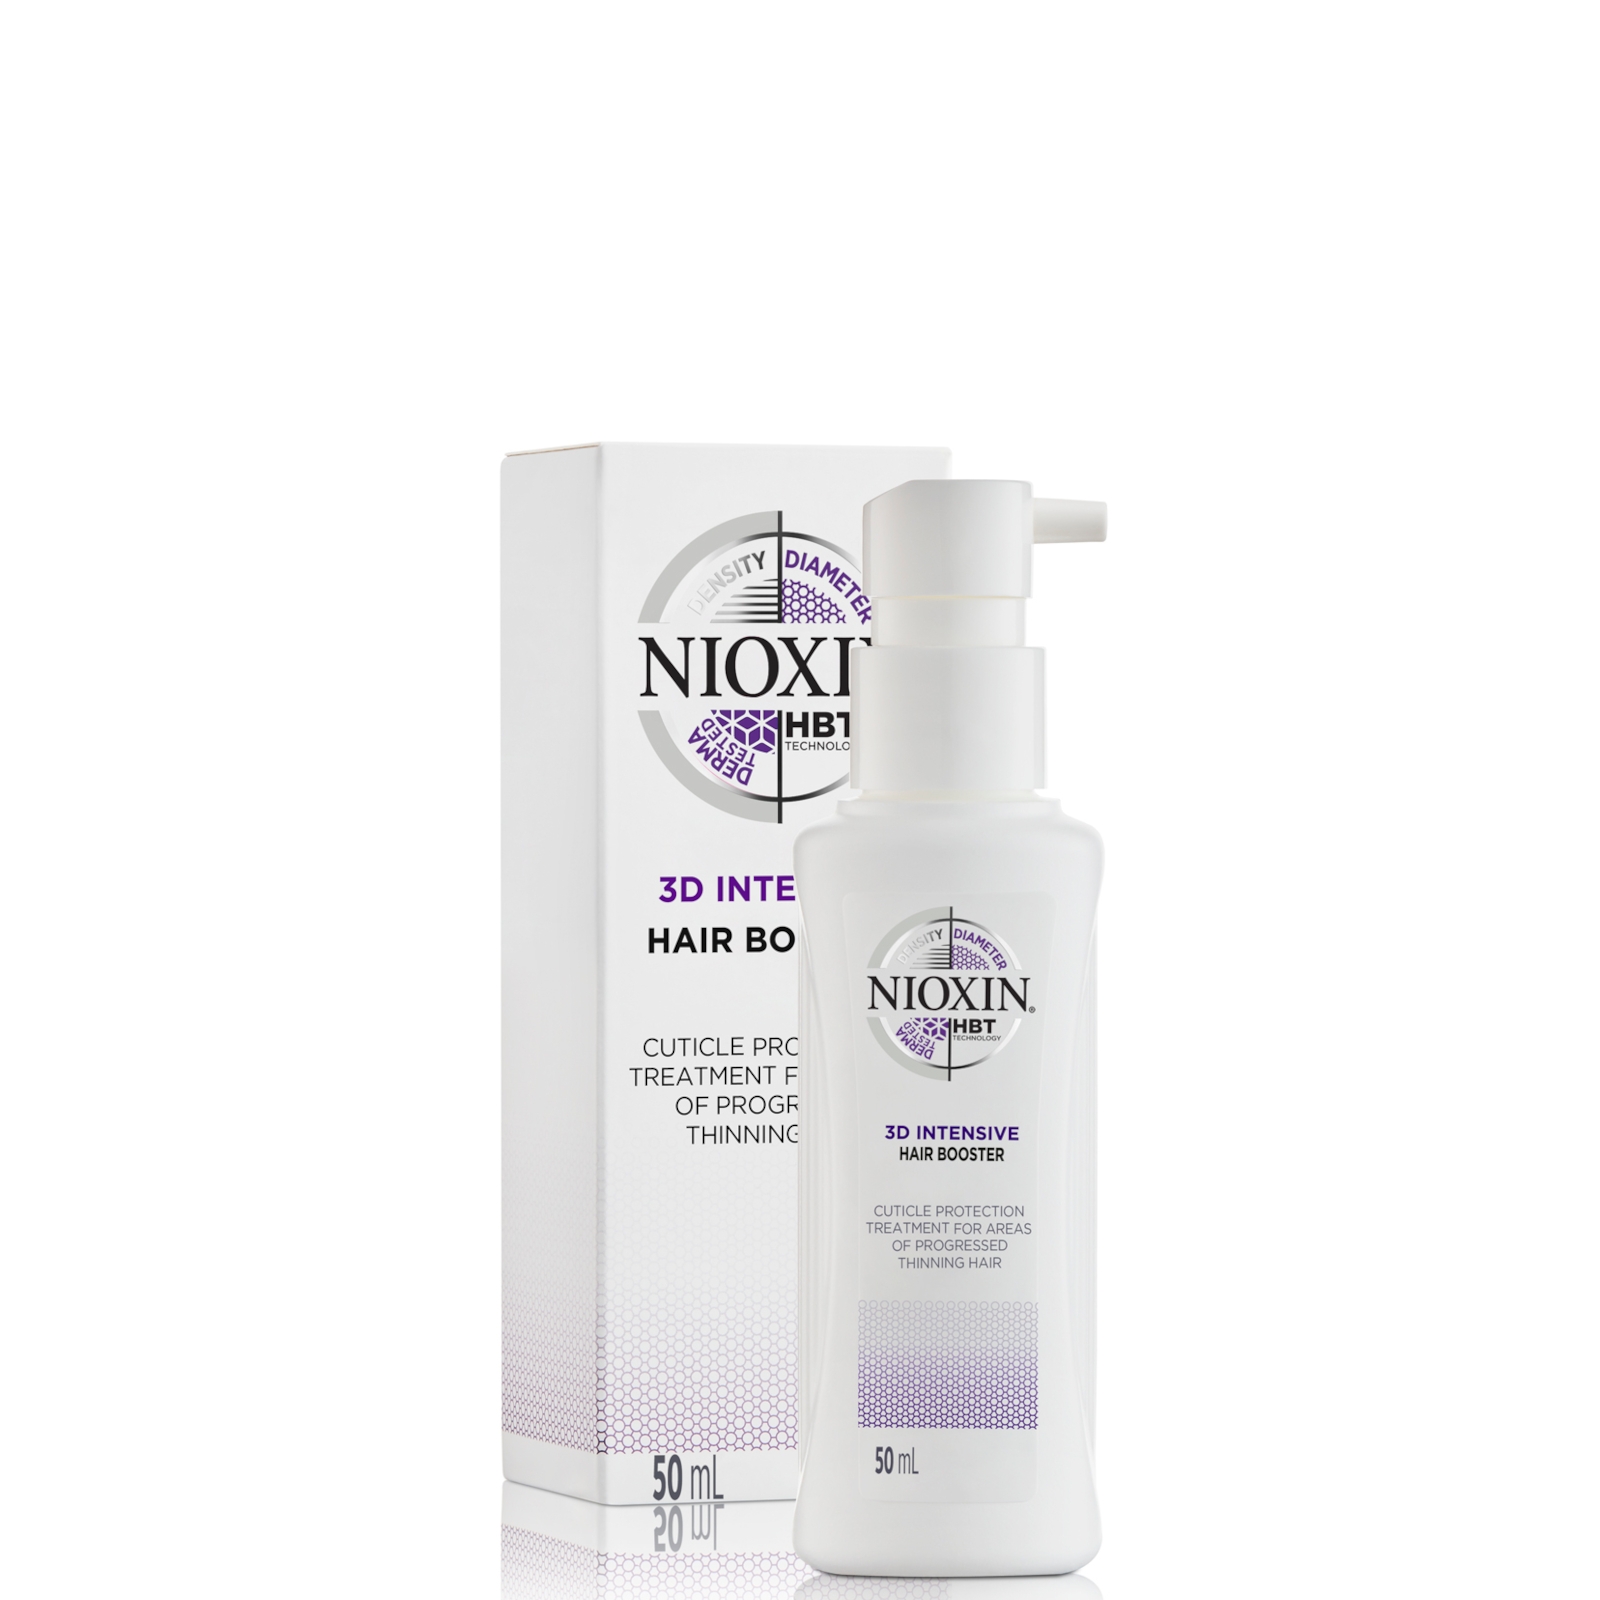 Image of Nioxin Hair Booster, Cuticle Protection Treatment for Progressed Thinning Hair, 50ml